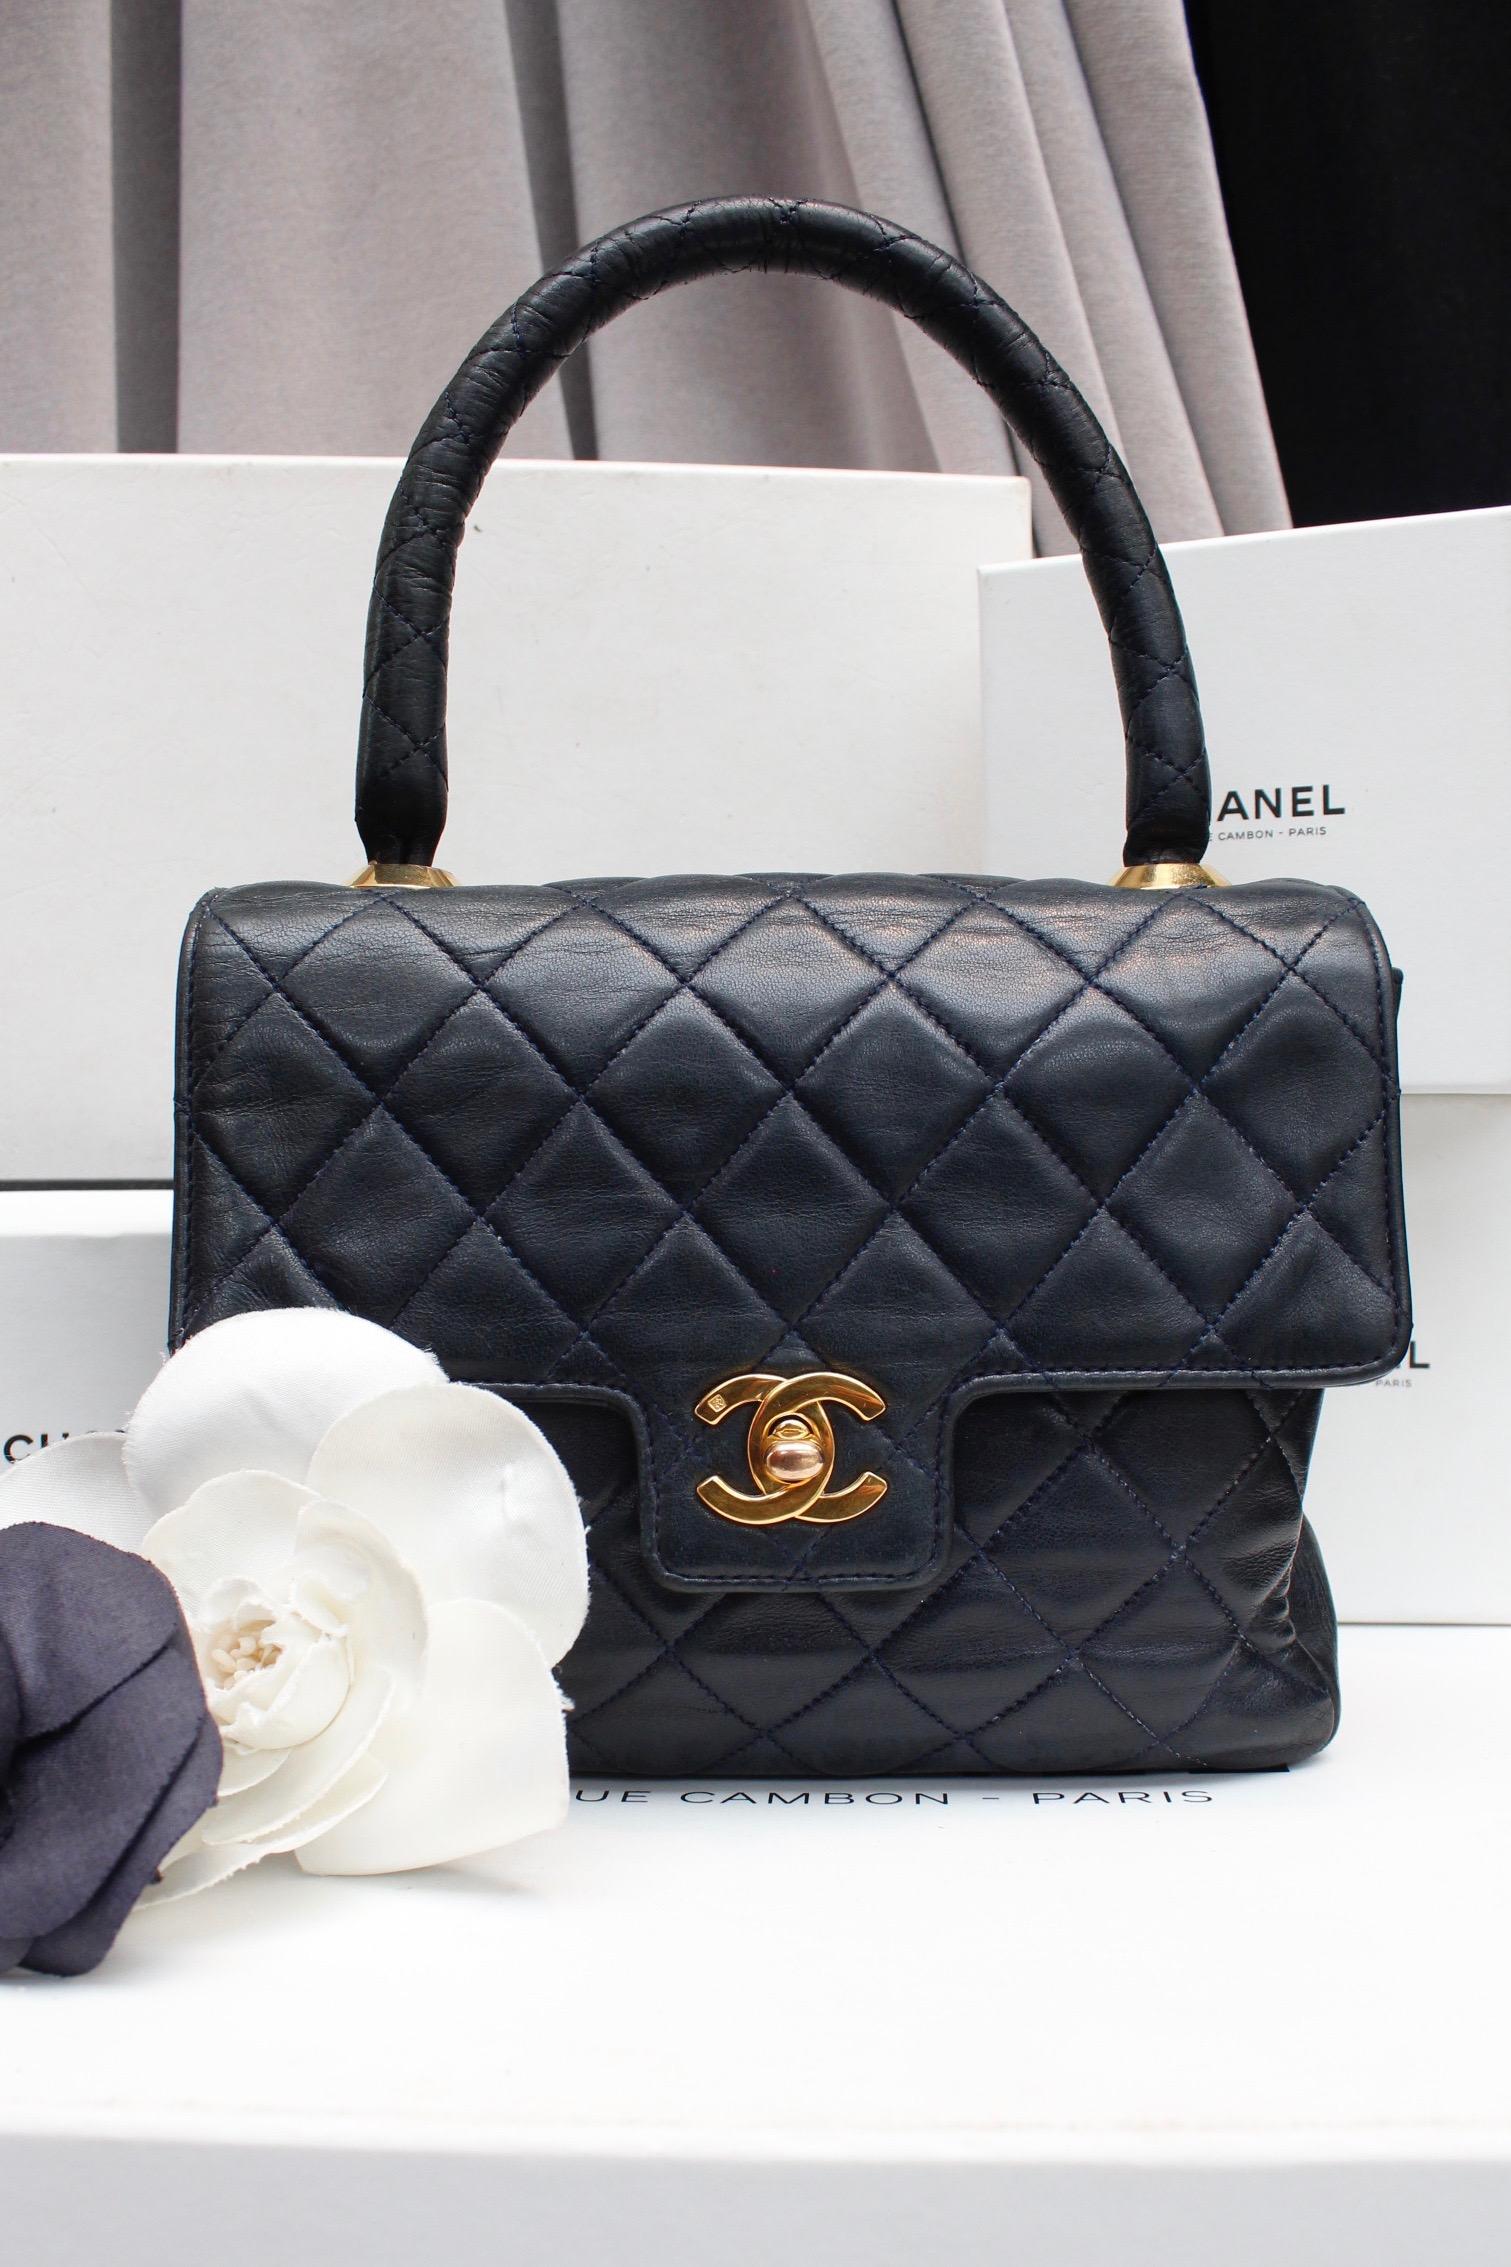 CHANEL – Charming little vintage handbag composed of quilted midnight blue lambskin. It features a quilted leather handle linked to the bag with two gilded metal rivets. It opens with a gilded metal twist lock. Red and blue leather lining.

The